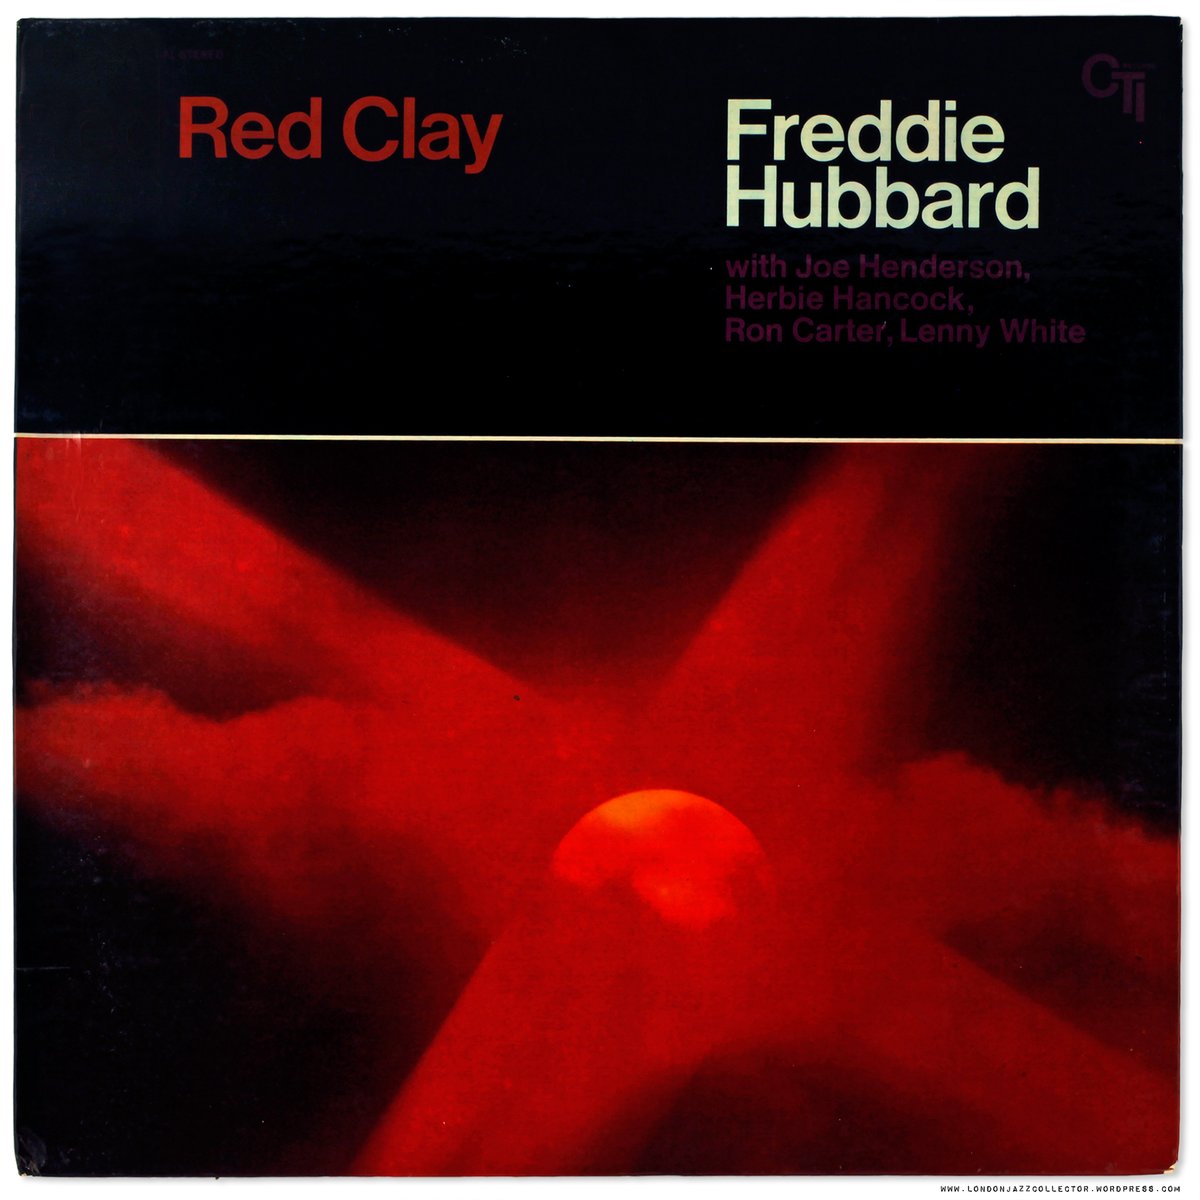 Another #FlashbackFriday this week brings us to May of 1970, when #FreddieHubbard released his famous album #RedClay. Freddie was a good friend of mine, and I thought the world of him as a musician. Give our work a listen here: ow.ly/NAvs50NPLEi